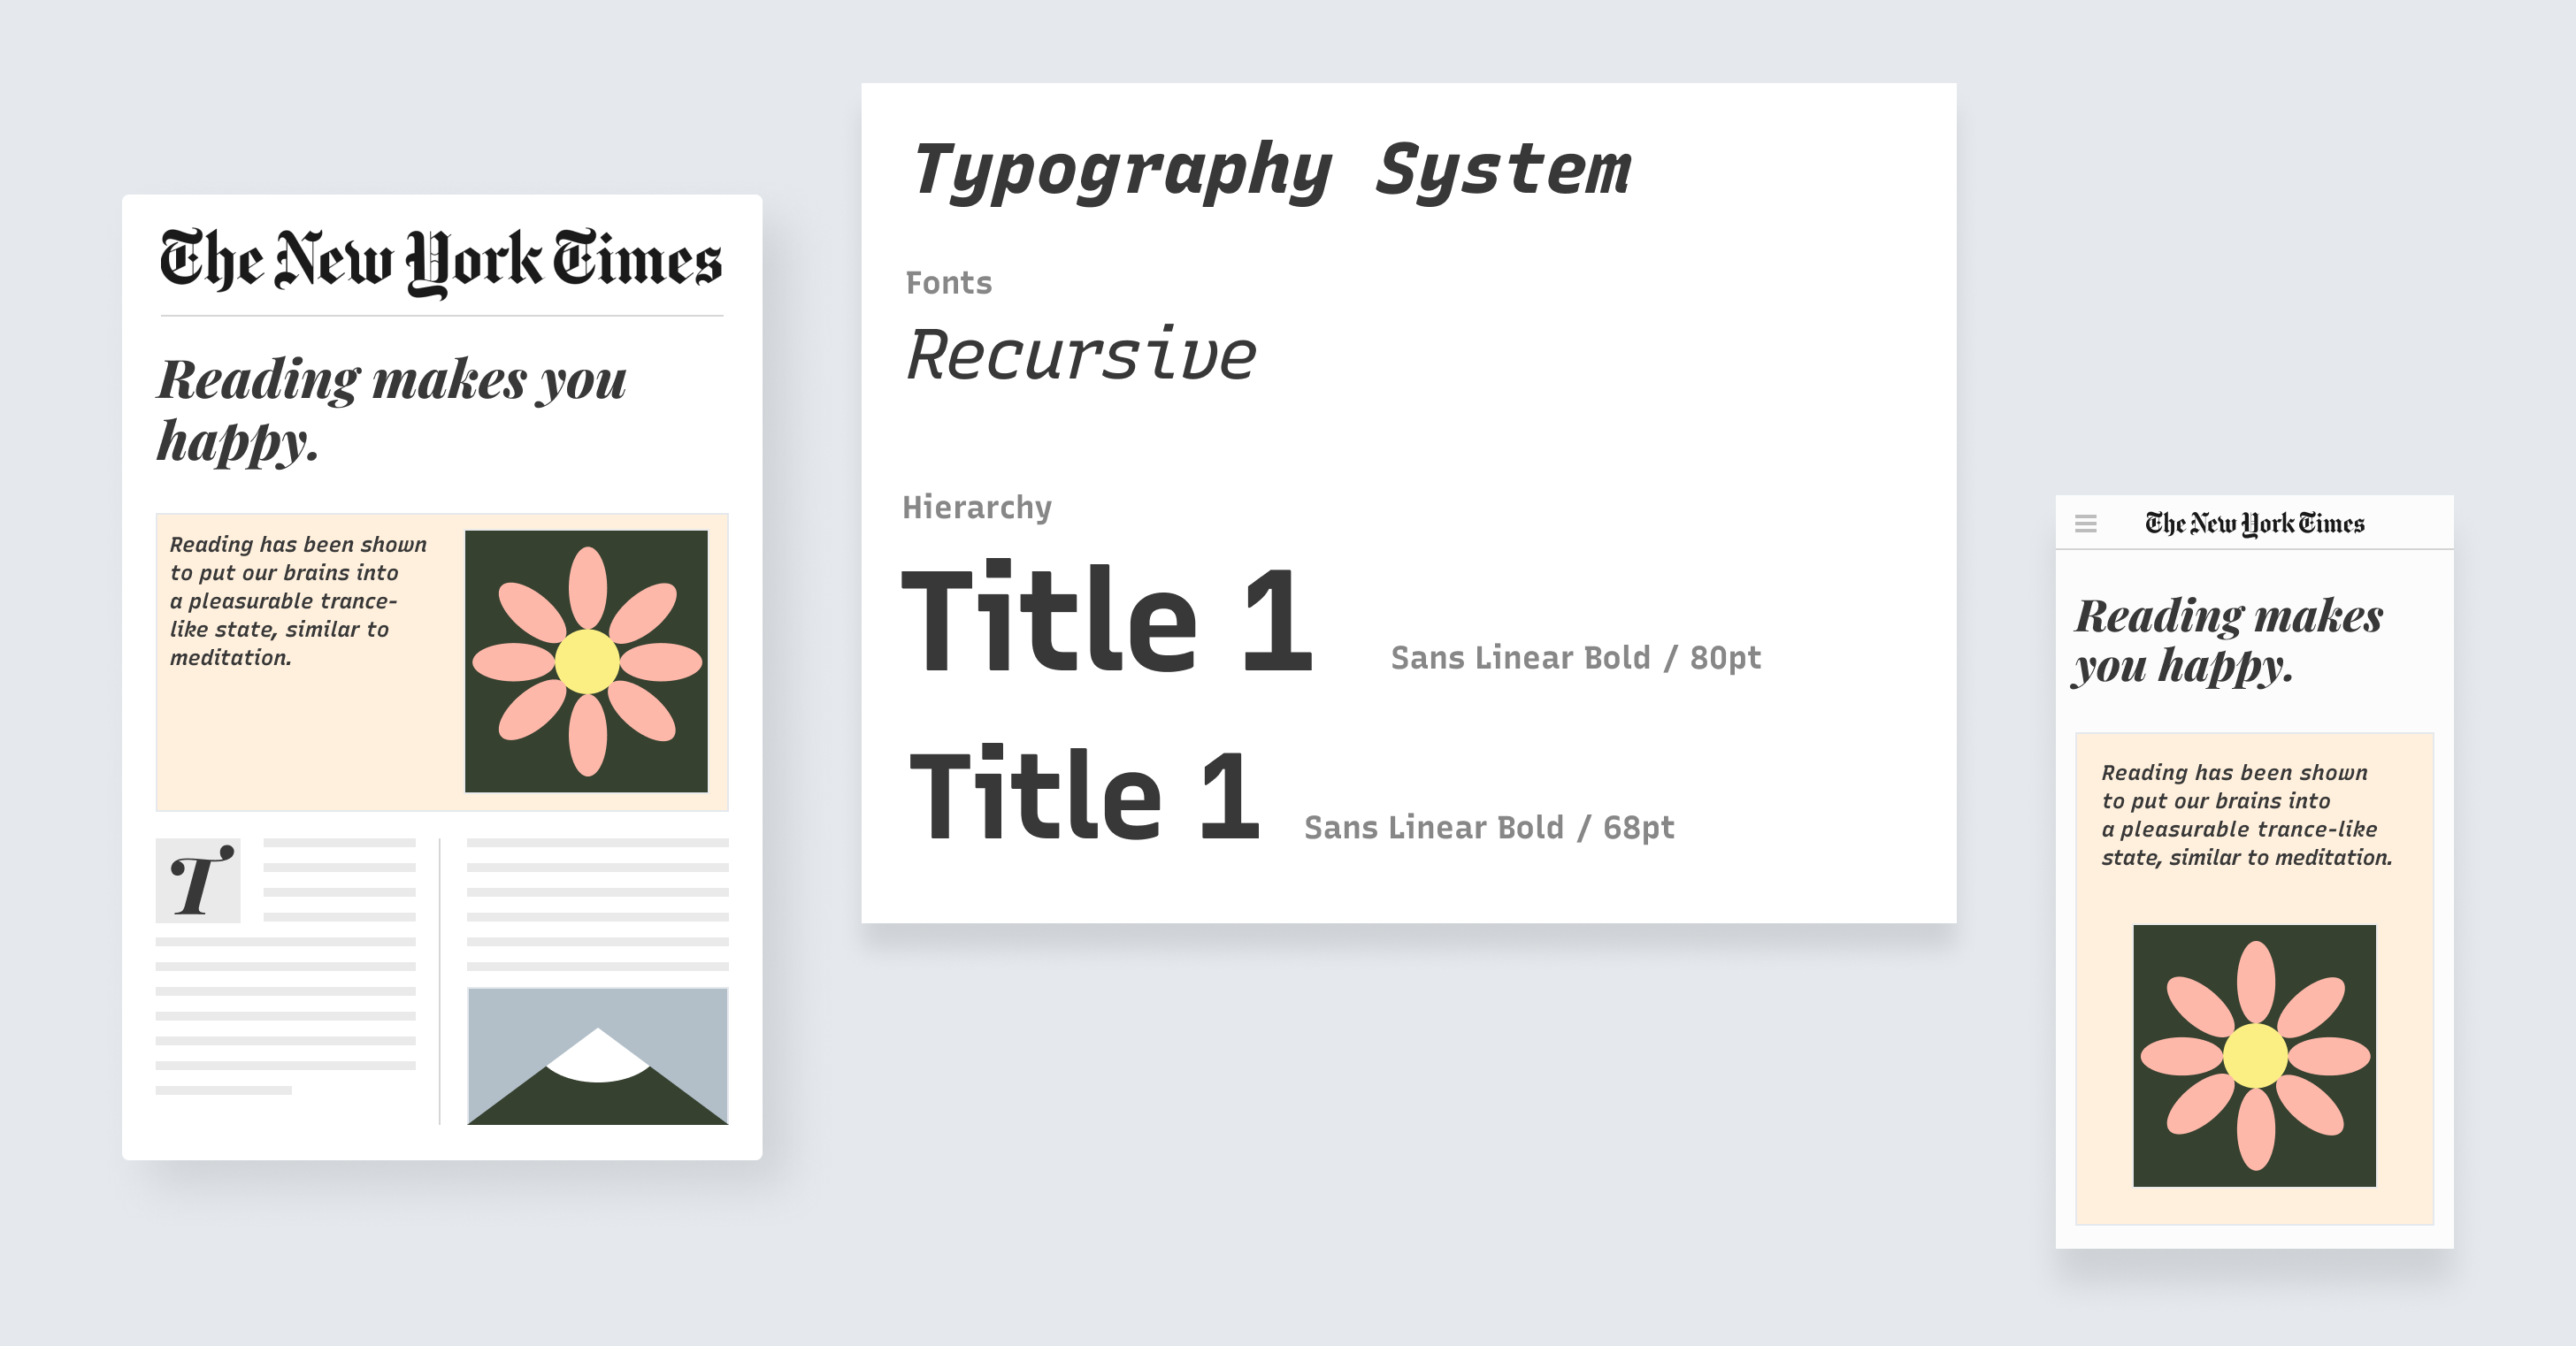 Typography helps information become clear and readable 